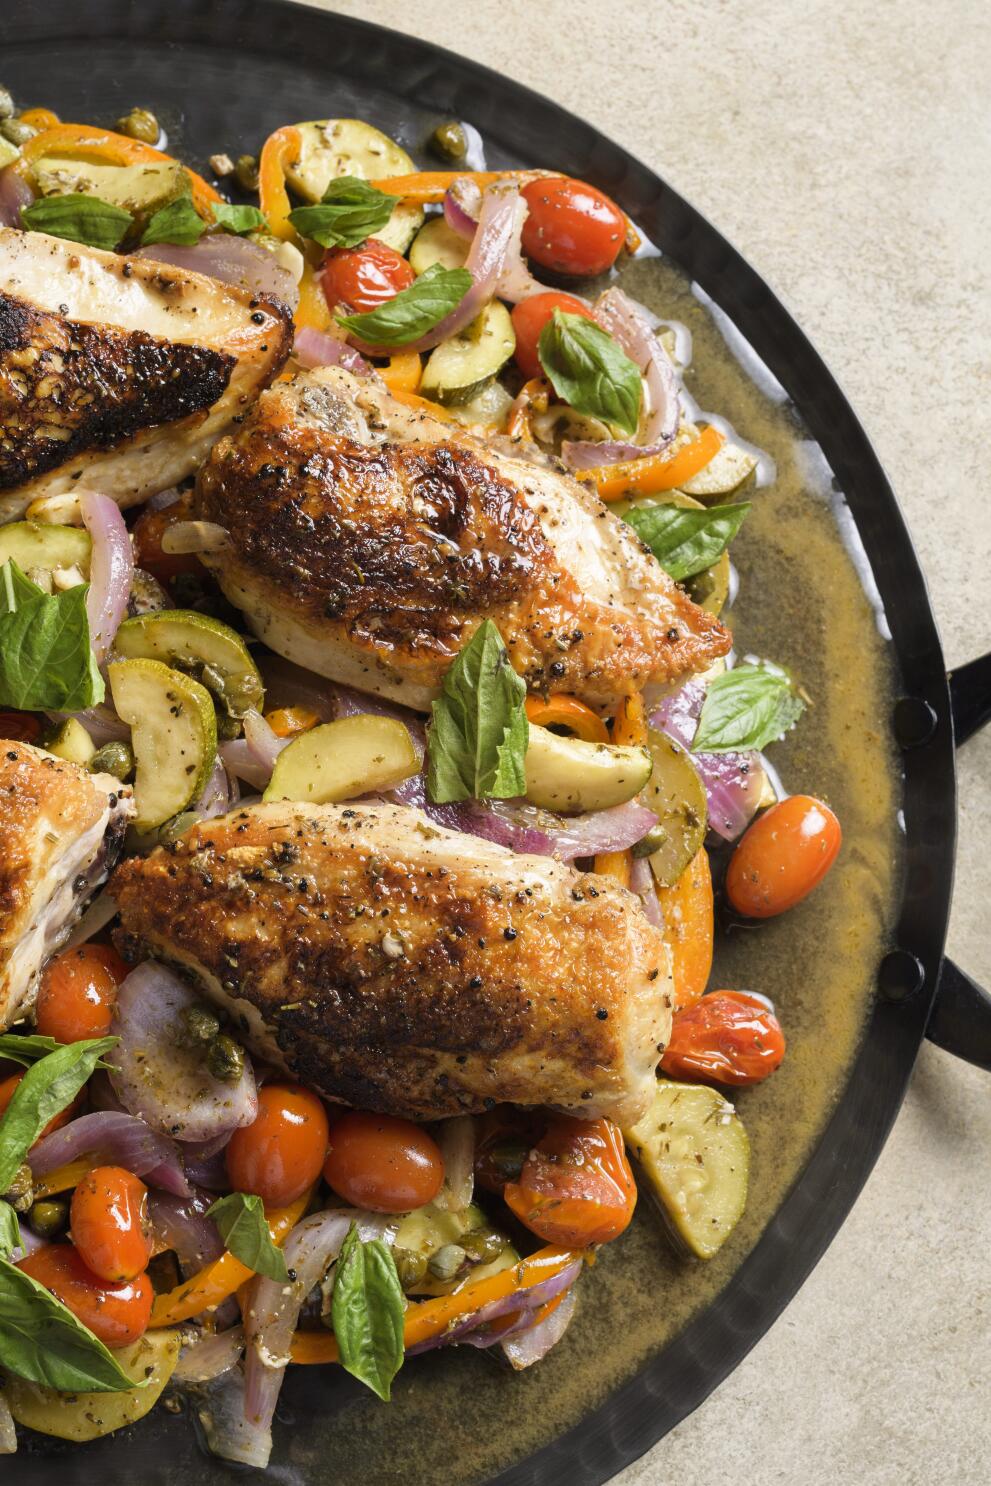 Roast chicken with rosemary and glazed baby vegetables - Émile Henry